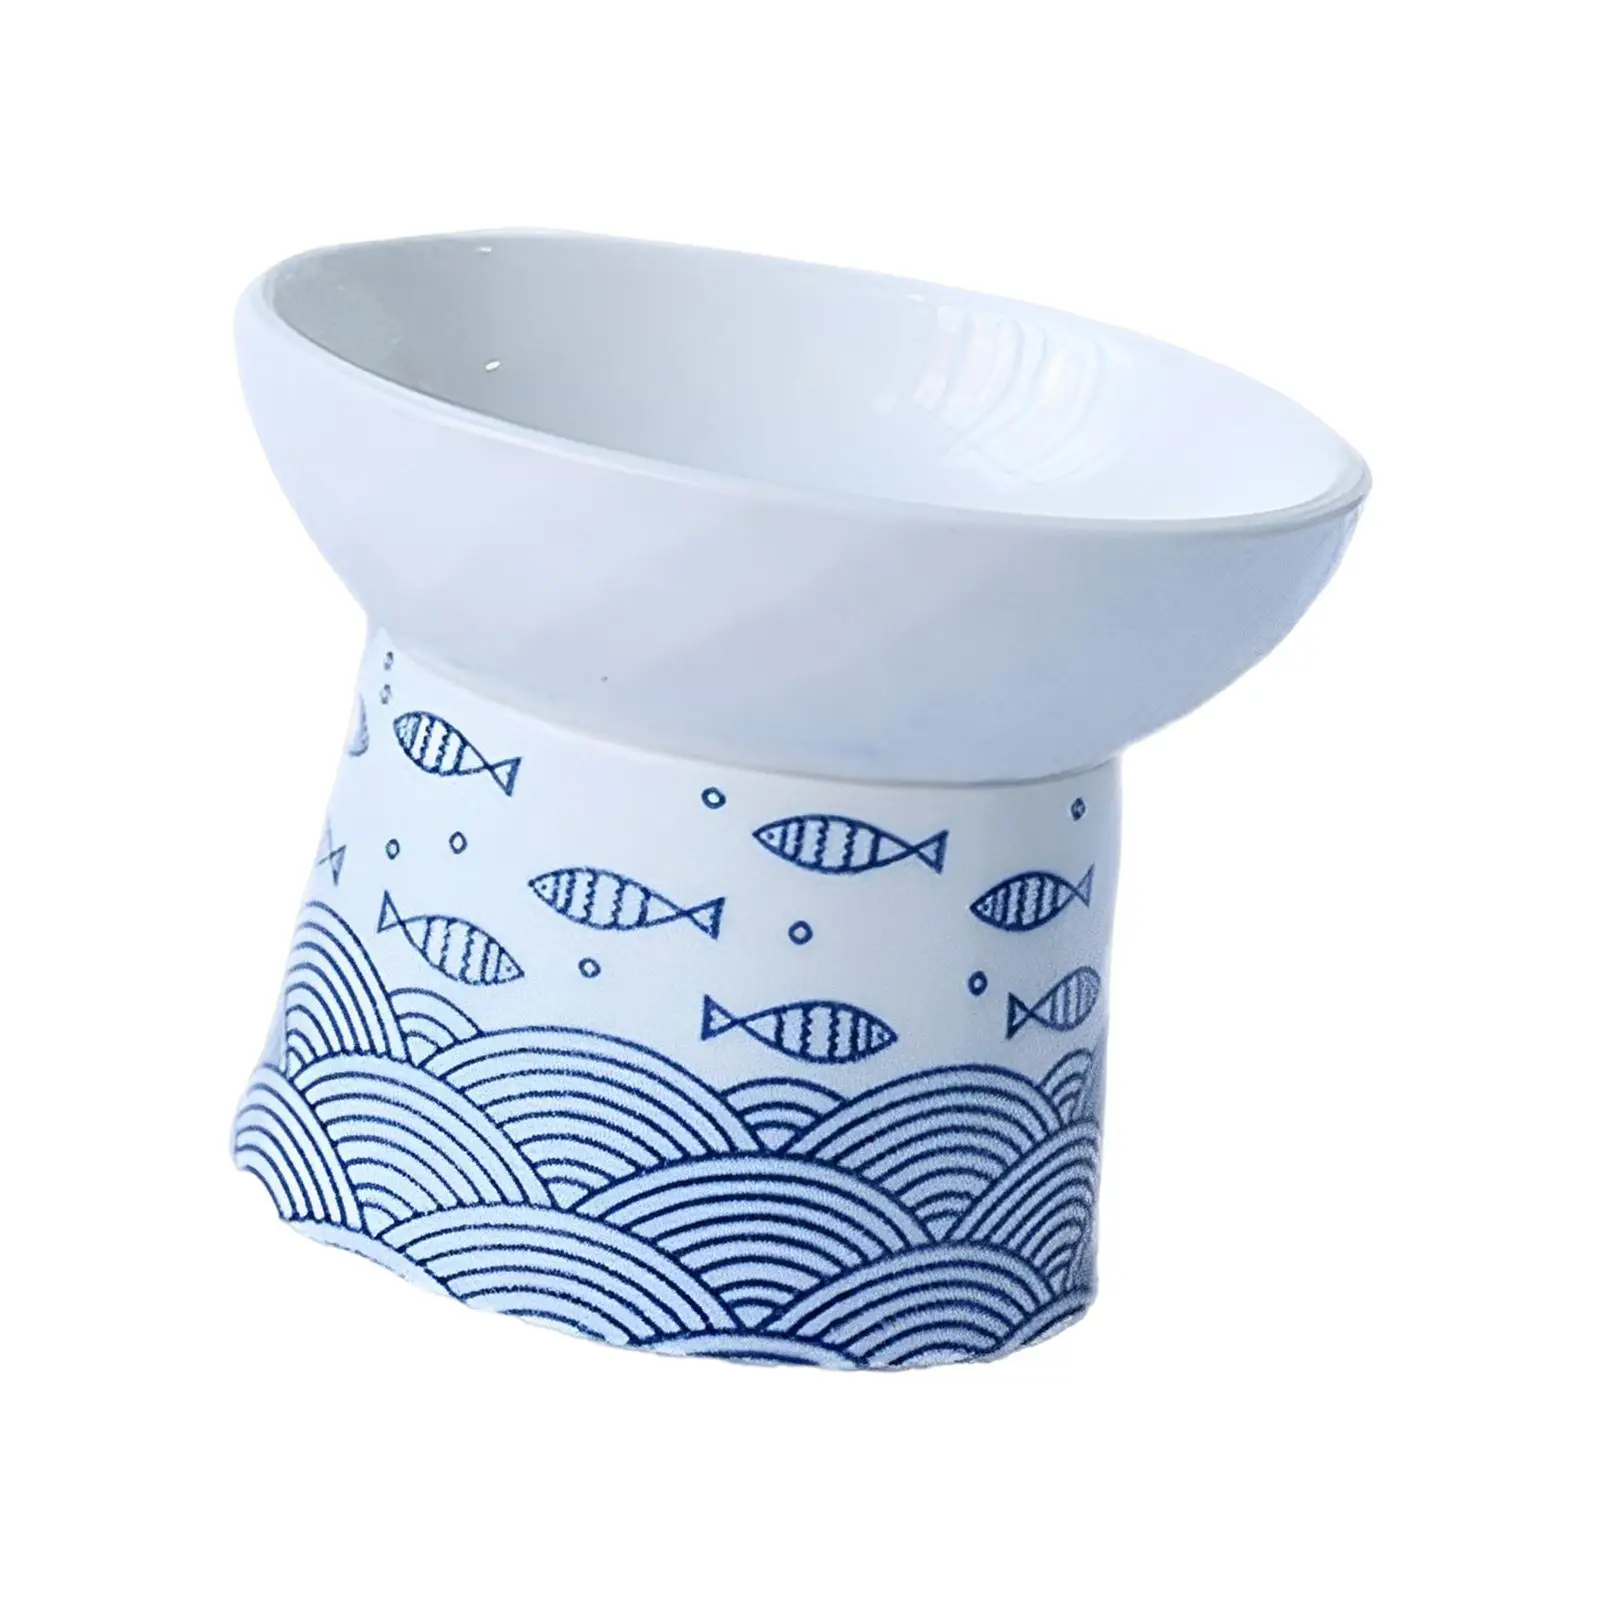 Raised Bowl Water Food Feeder Non Slip Durable Single Bowl for Cat Dog Neck Protective Bowl for Small Medium Dogs Puppy Cats